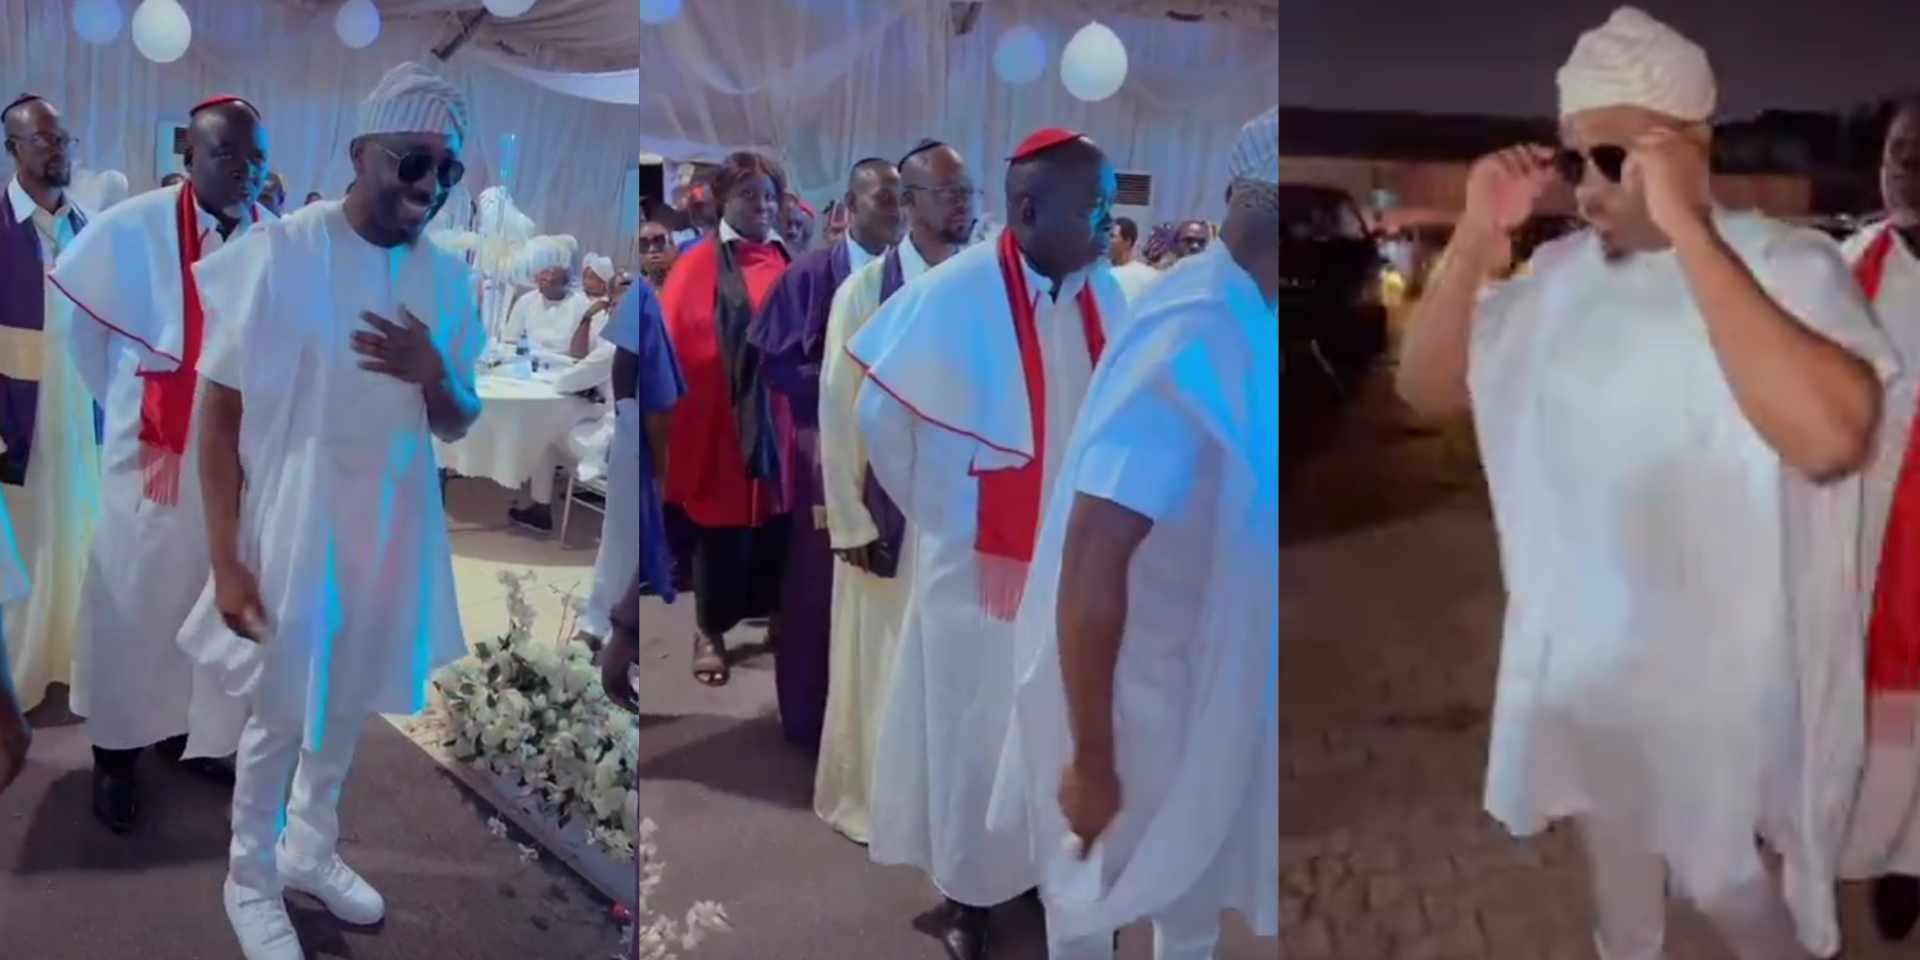 Moment Pretty Mike storms event with 'fake bishops', sends advice to Nigerians ahead of 2023 [Video]